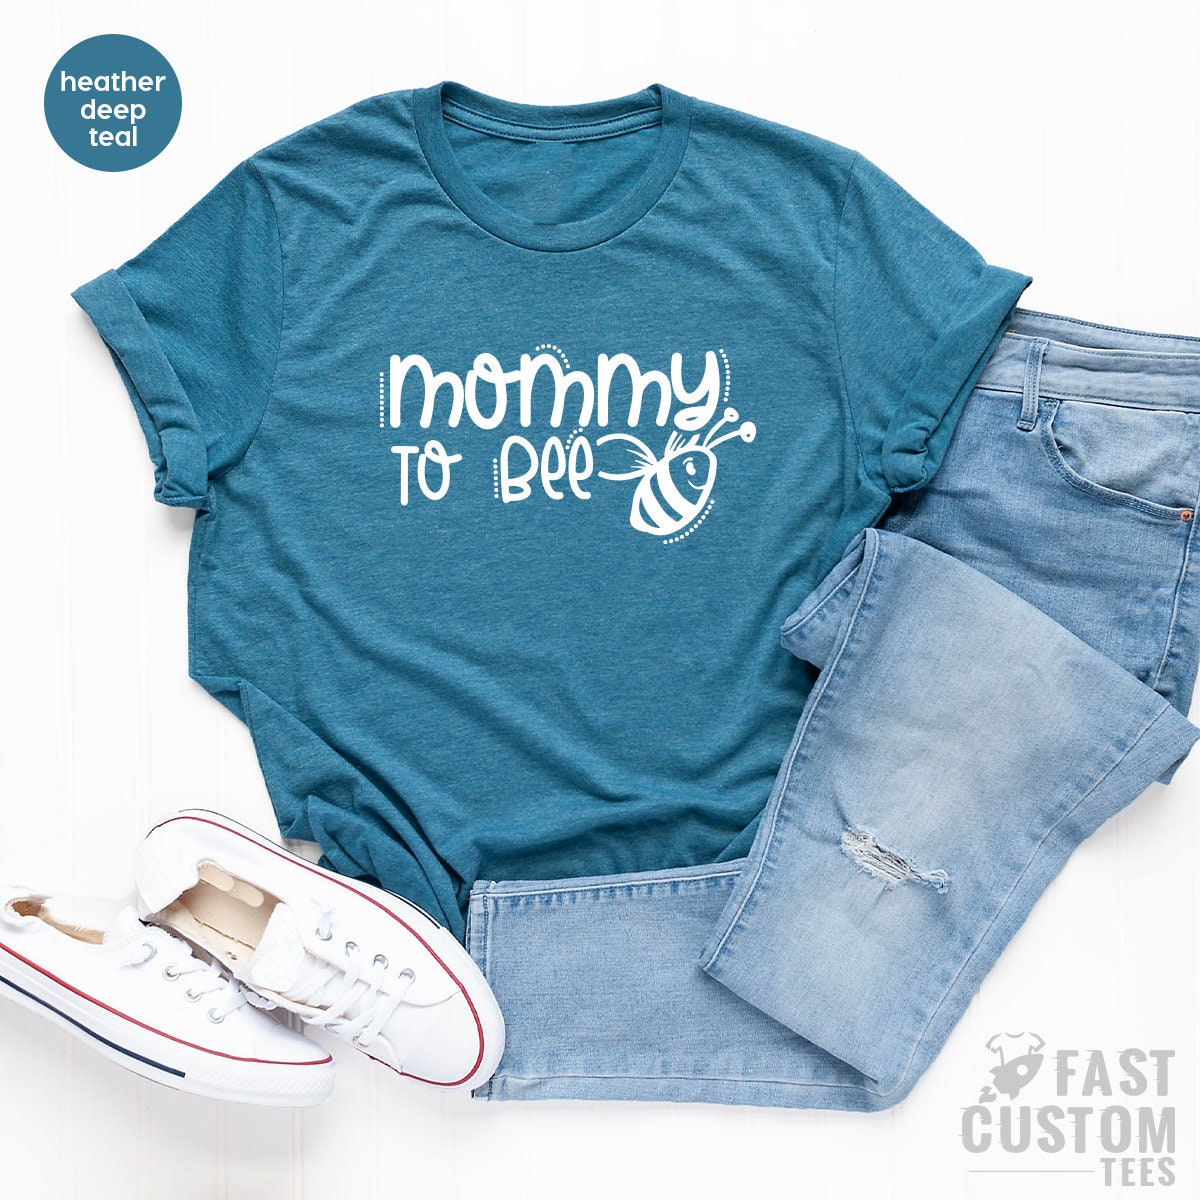 Gift for Her, Mom Shirts, Cool Mom Shirt, Mom Shirt, Gifts for Mom, Gift for New Moms